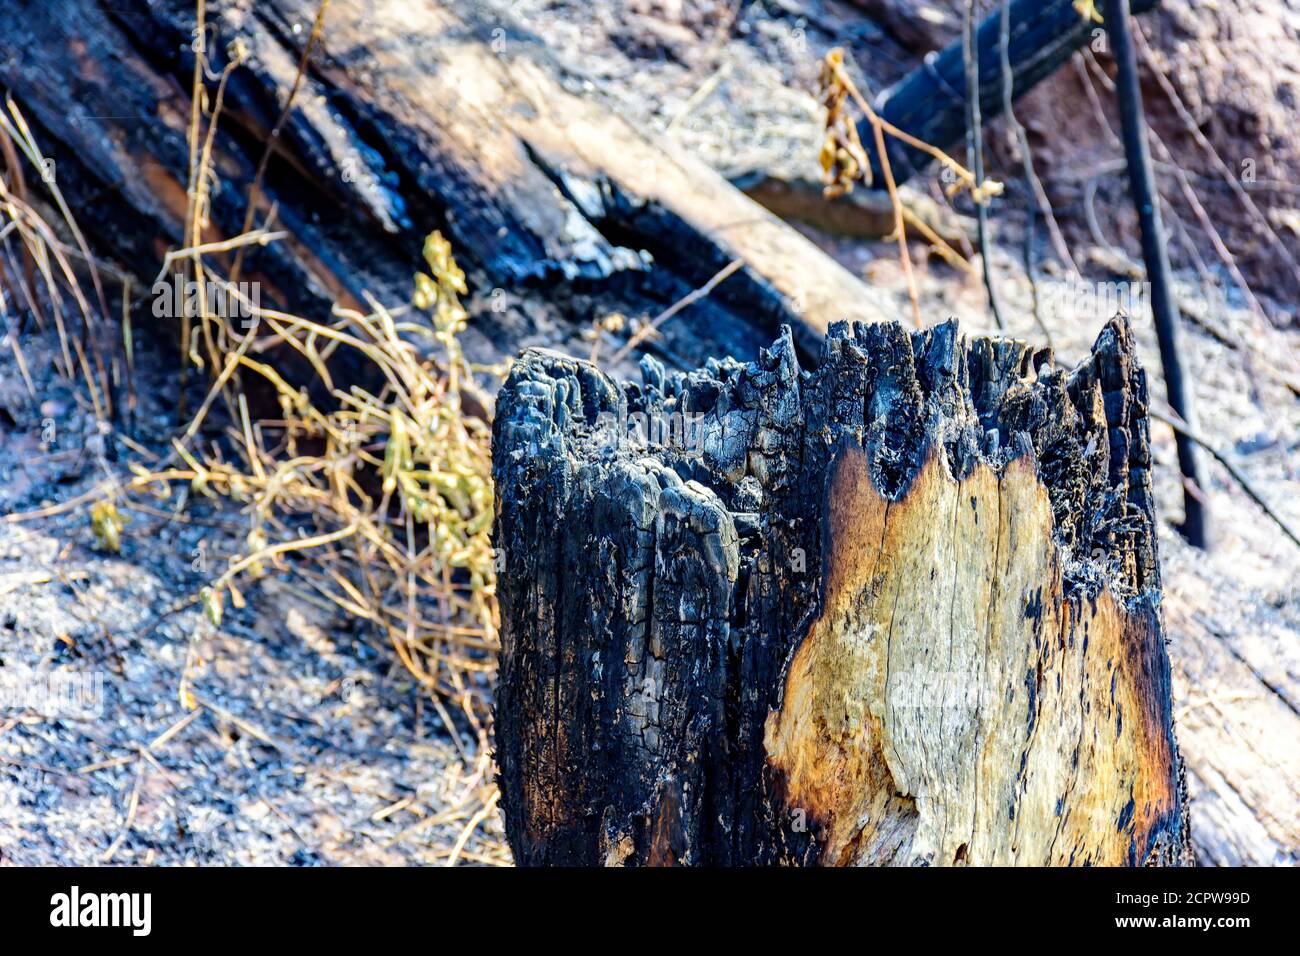 Logs, trees and vegetation burned during forest fire in Brazil Stock Photo